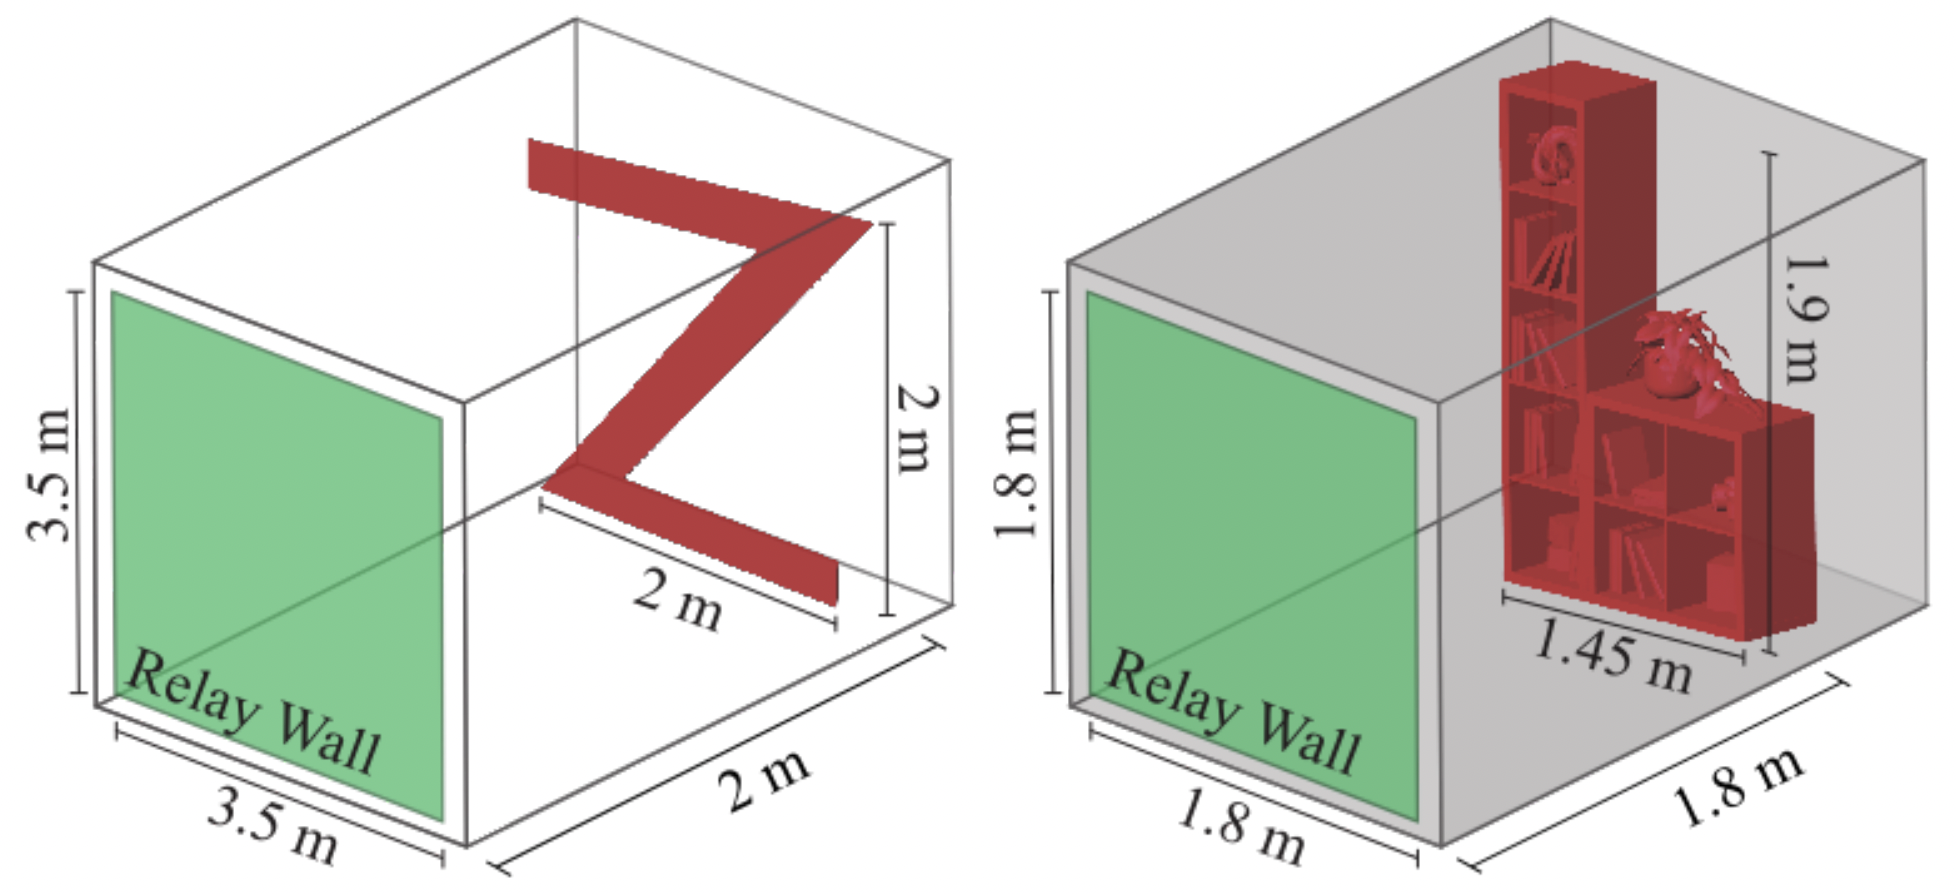 Simulated scenes. We use two simulated scenes: (Left) a single planar letter behind the diffuser (green), and (Right) a closed room with a shelf (red) at the back.